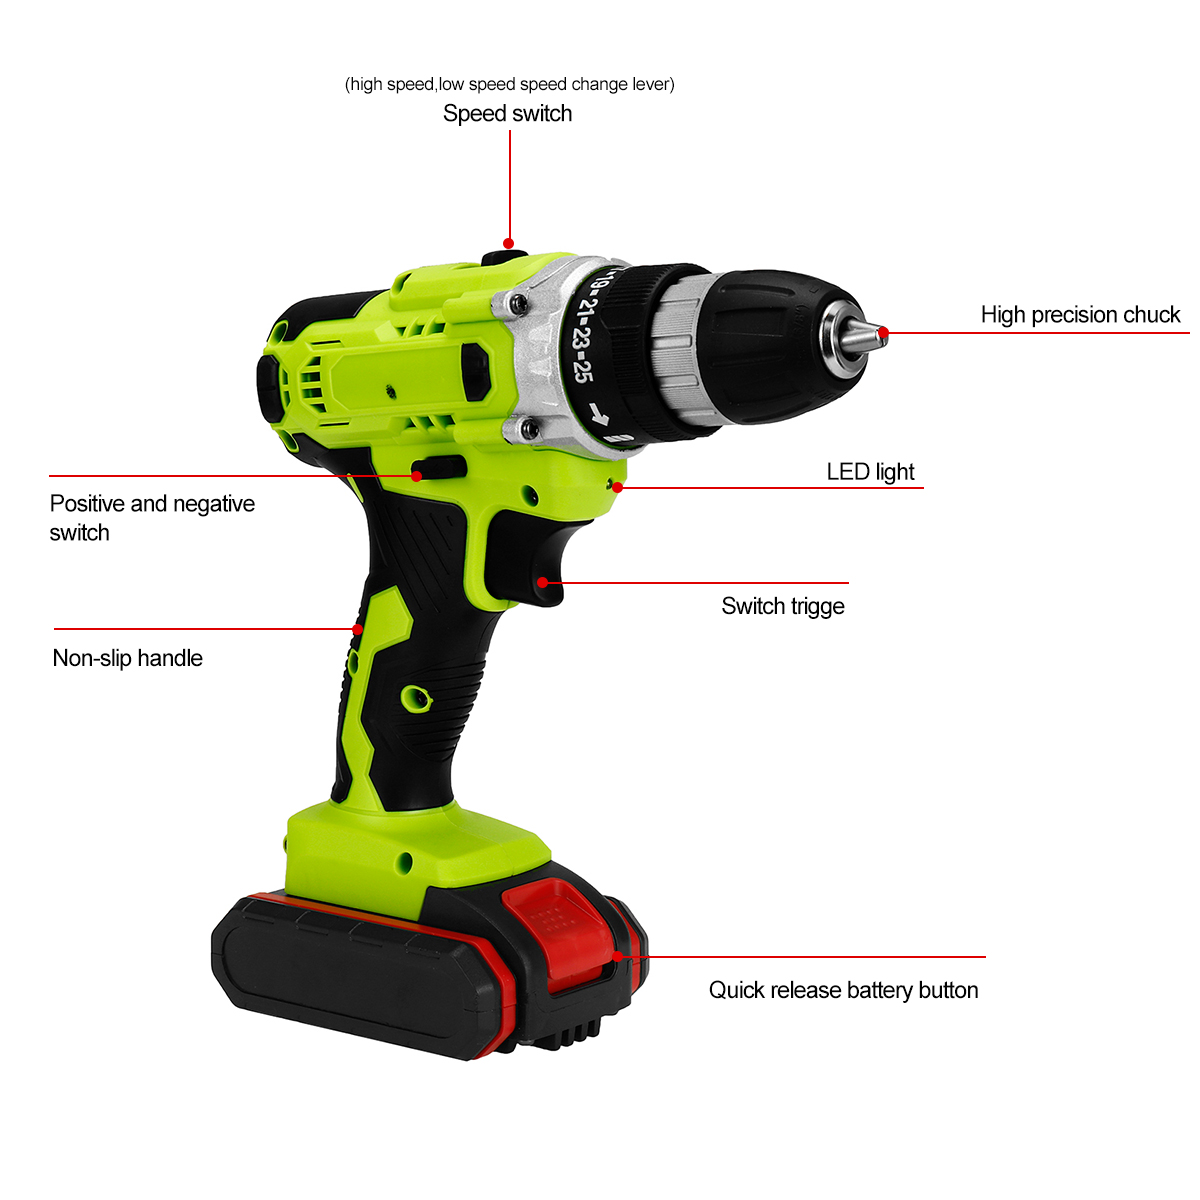 38-Inch-UK-Plug-Multifunctional-Cordless-Drill-Chuck-Impact-Drilling-Tool-Electric-Drill-1943466-2